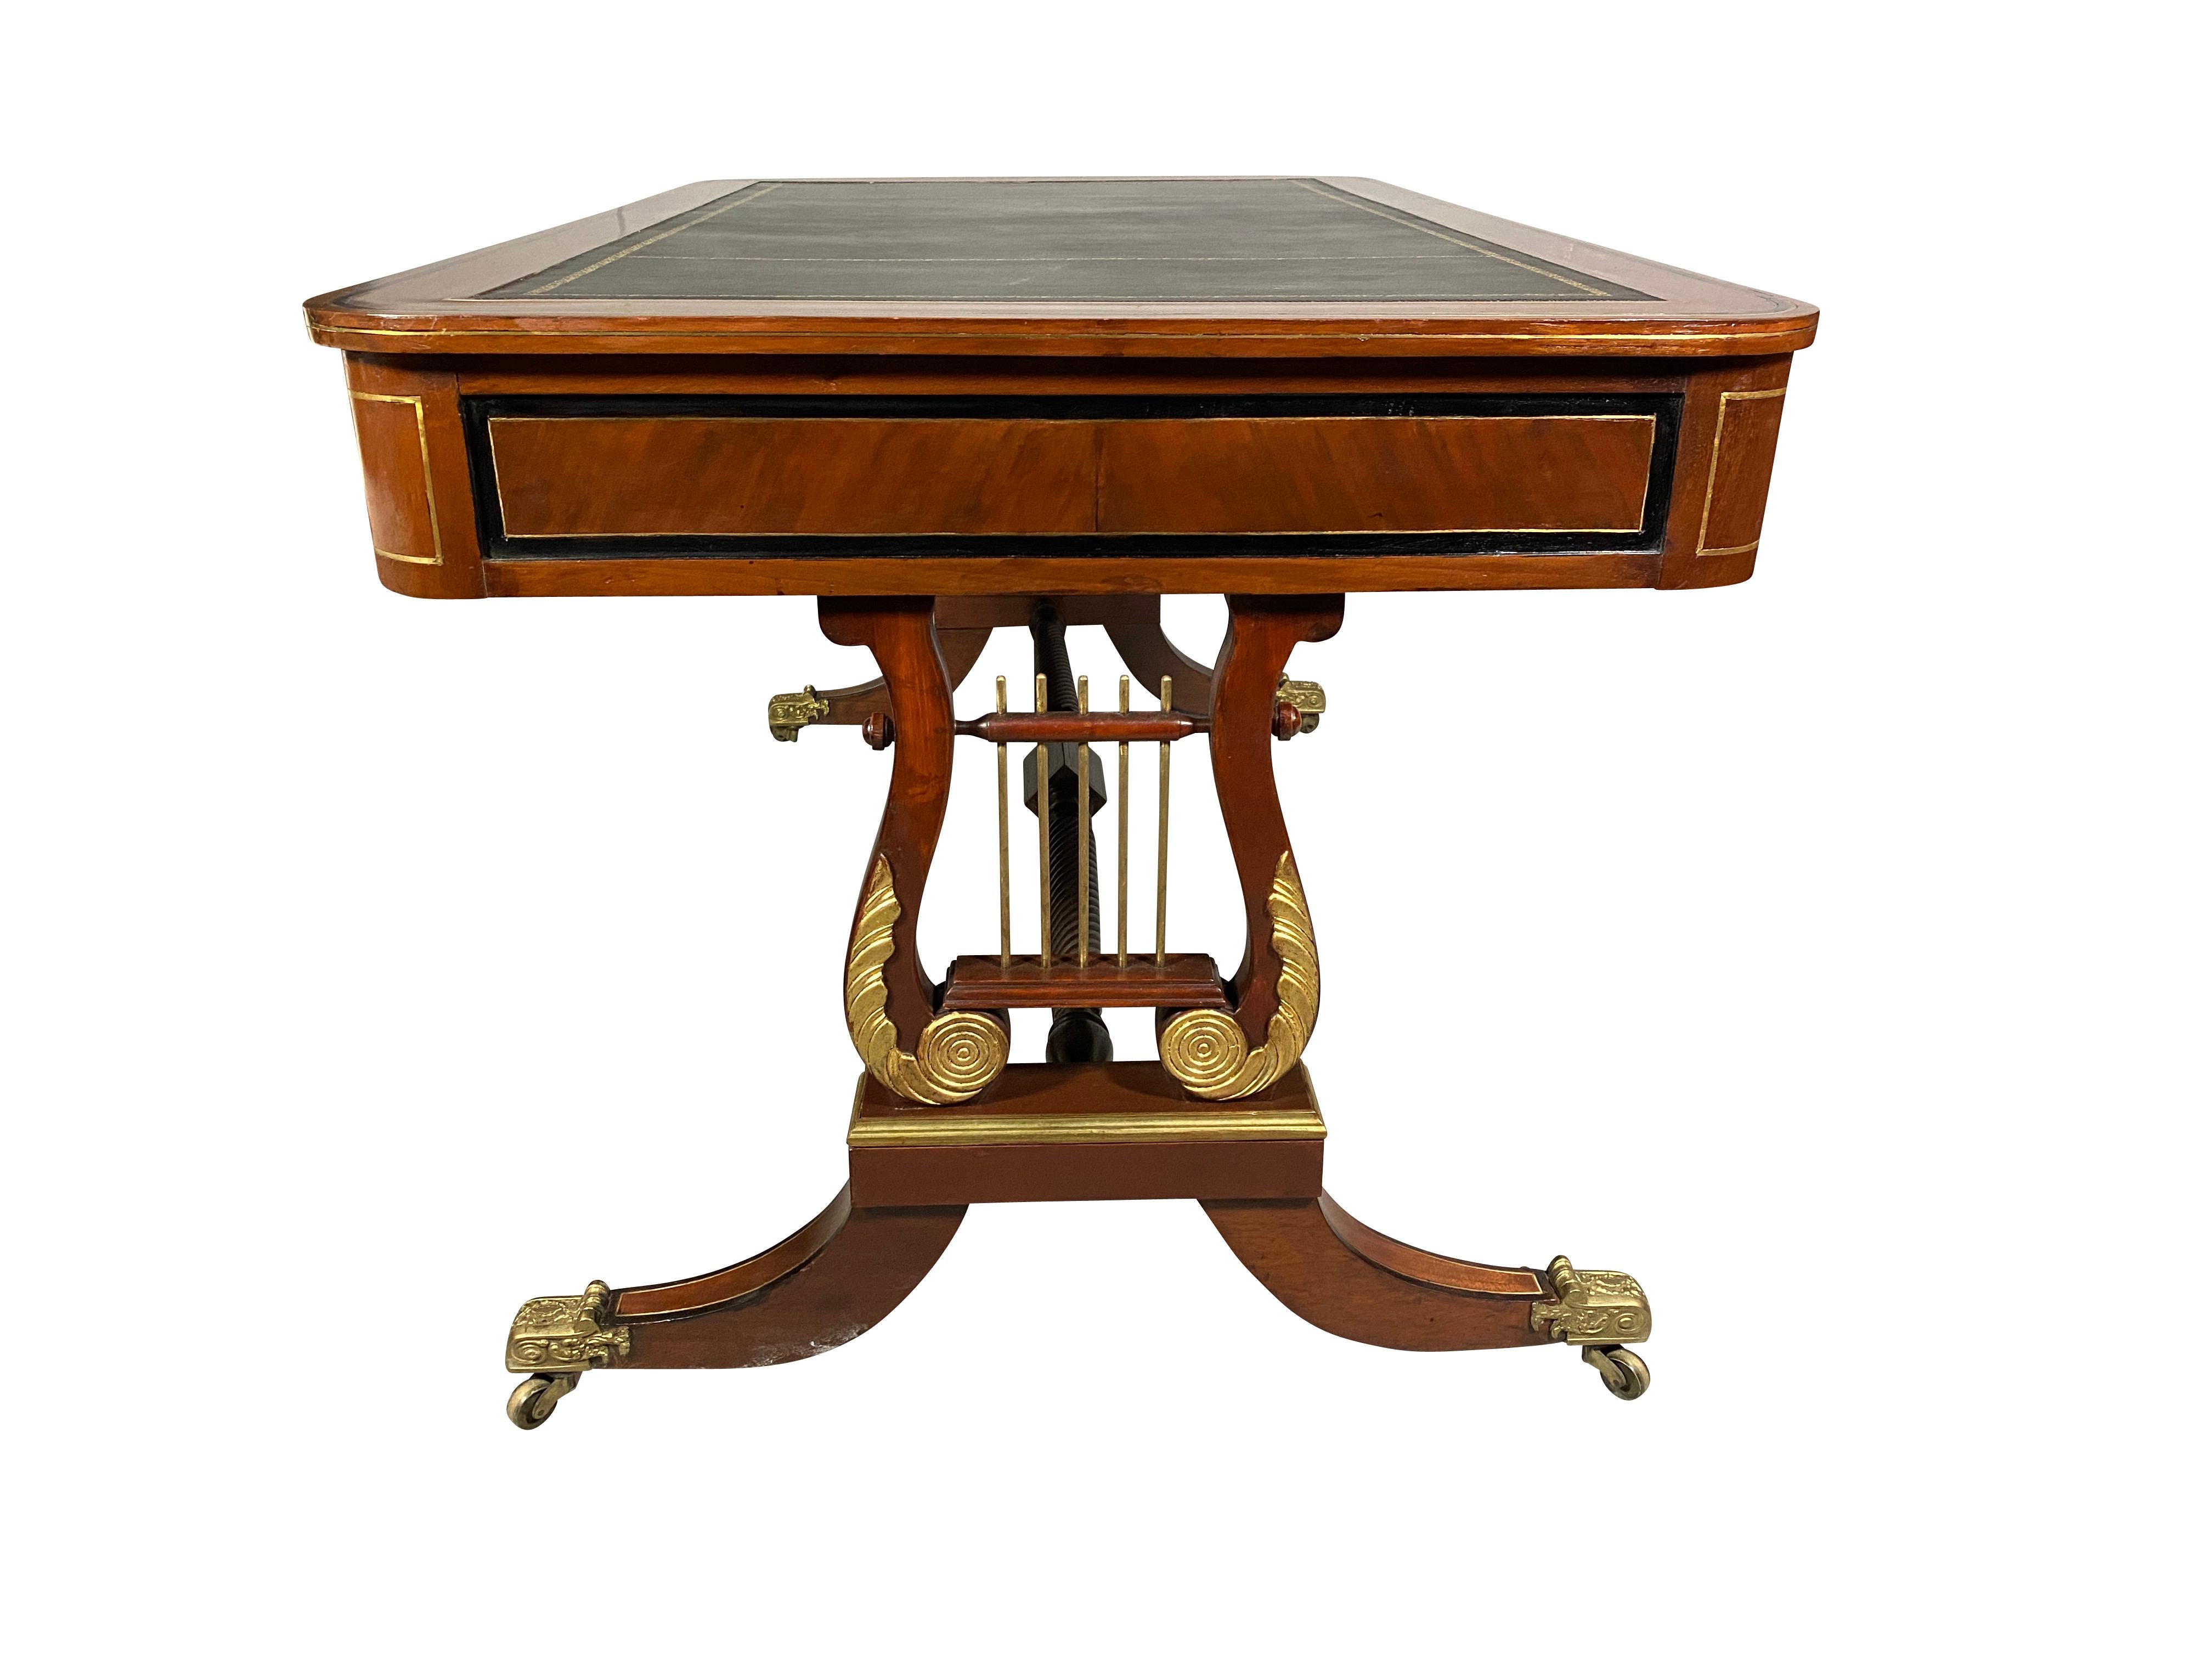 English Regency Style Mahogany and Brass Inlaid Writing Table